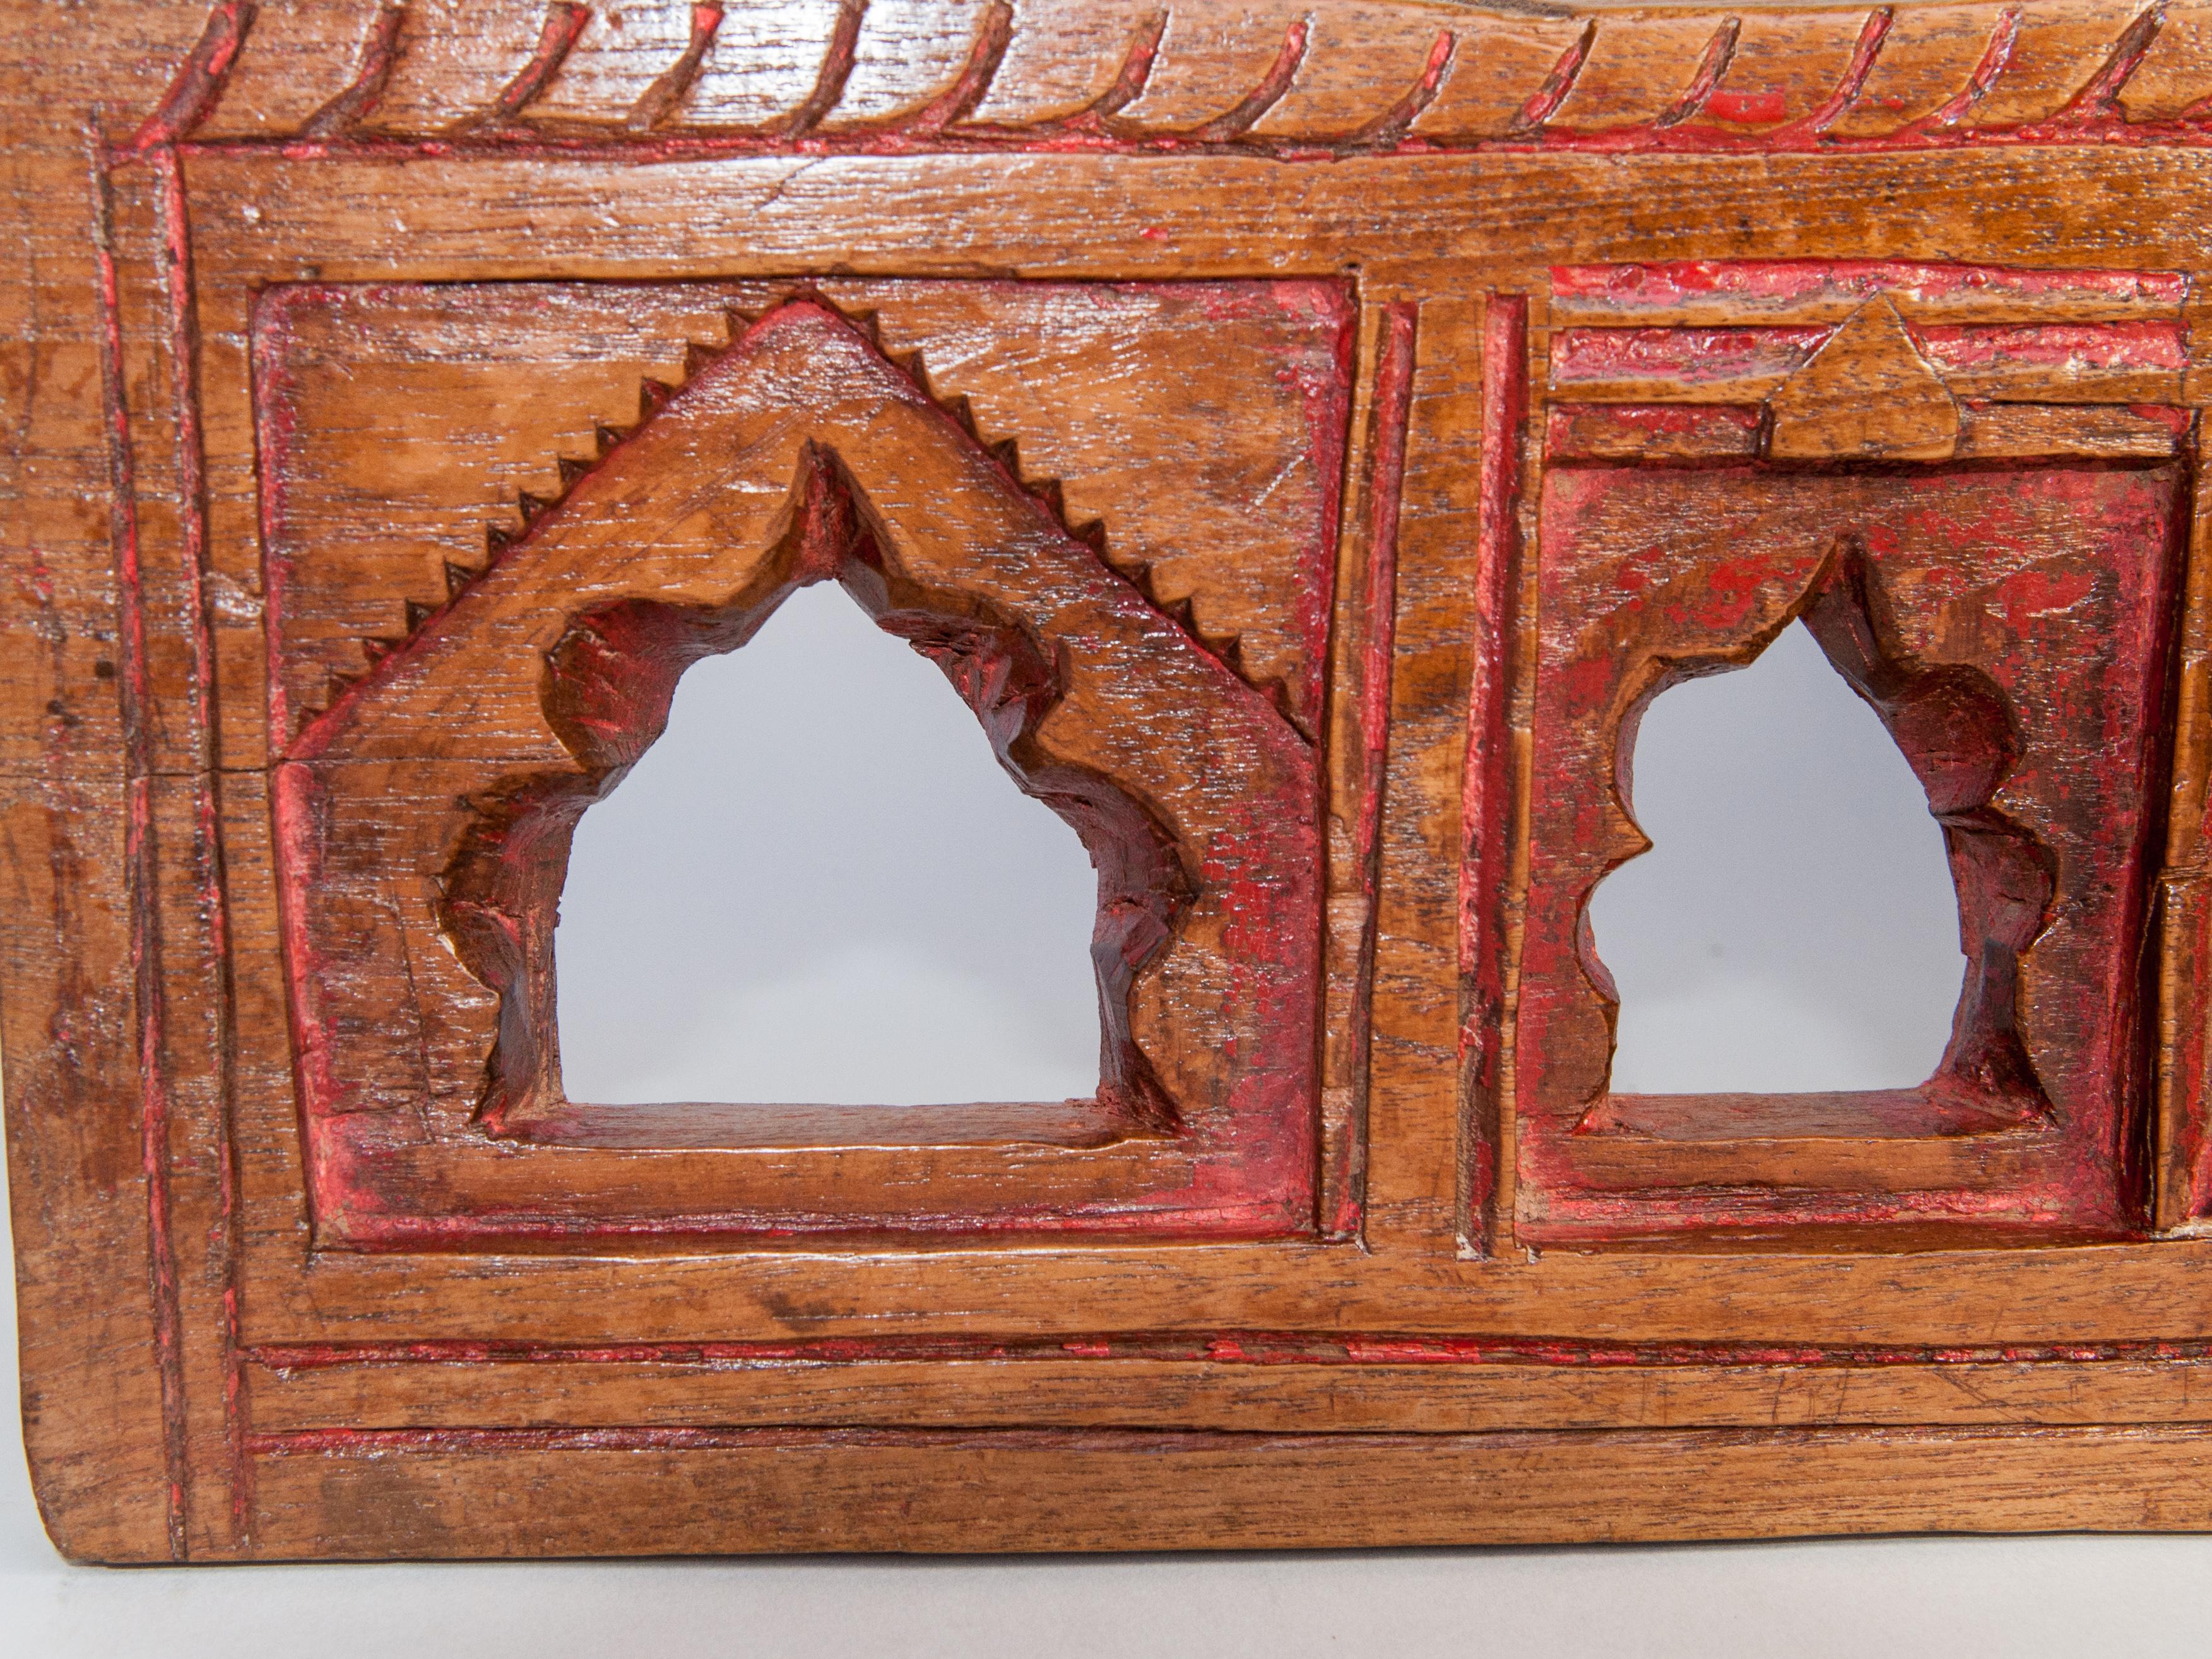 Vintage miniature architectural votive or picture frame, hand carved of wood, with slight traces of original color, mid-20th century, India. Measures: 9.5 wide x 7.5 high
This vintage hand carved wooden frame, from South India, is basically an